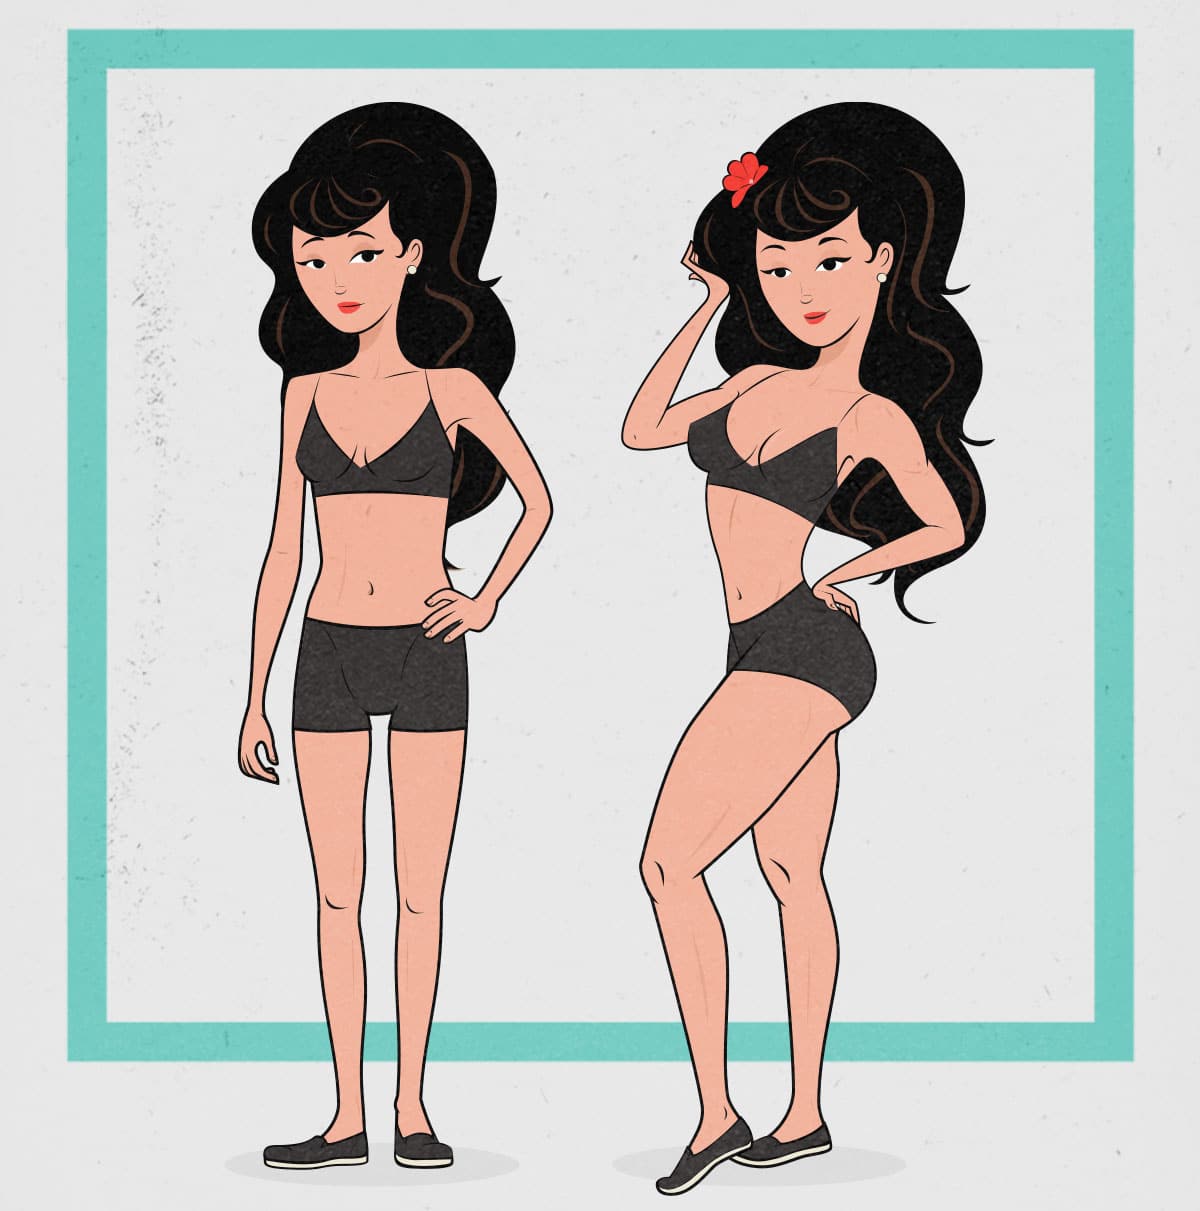 Illustration of a skinny woman gaining weight.